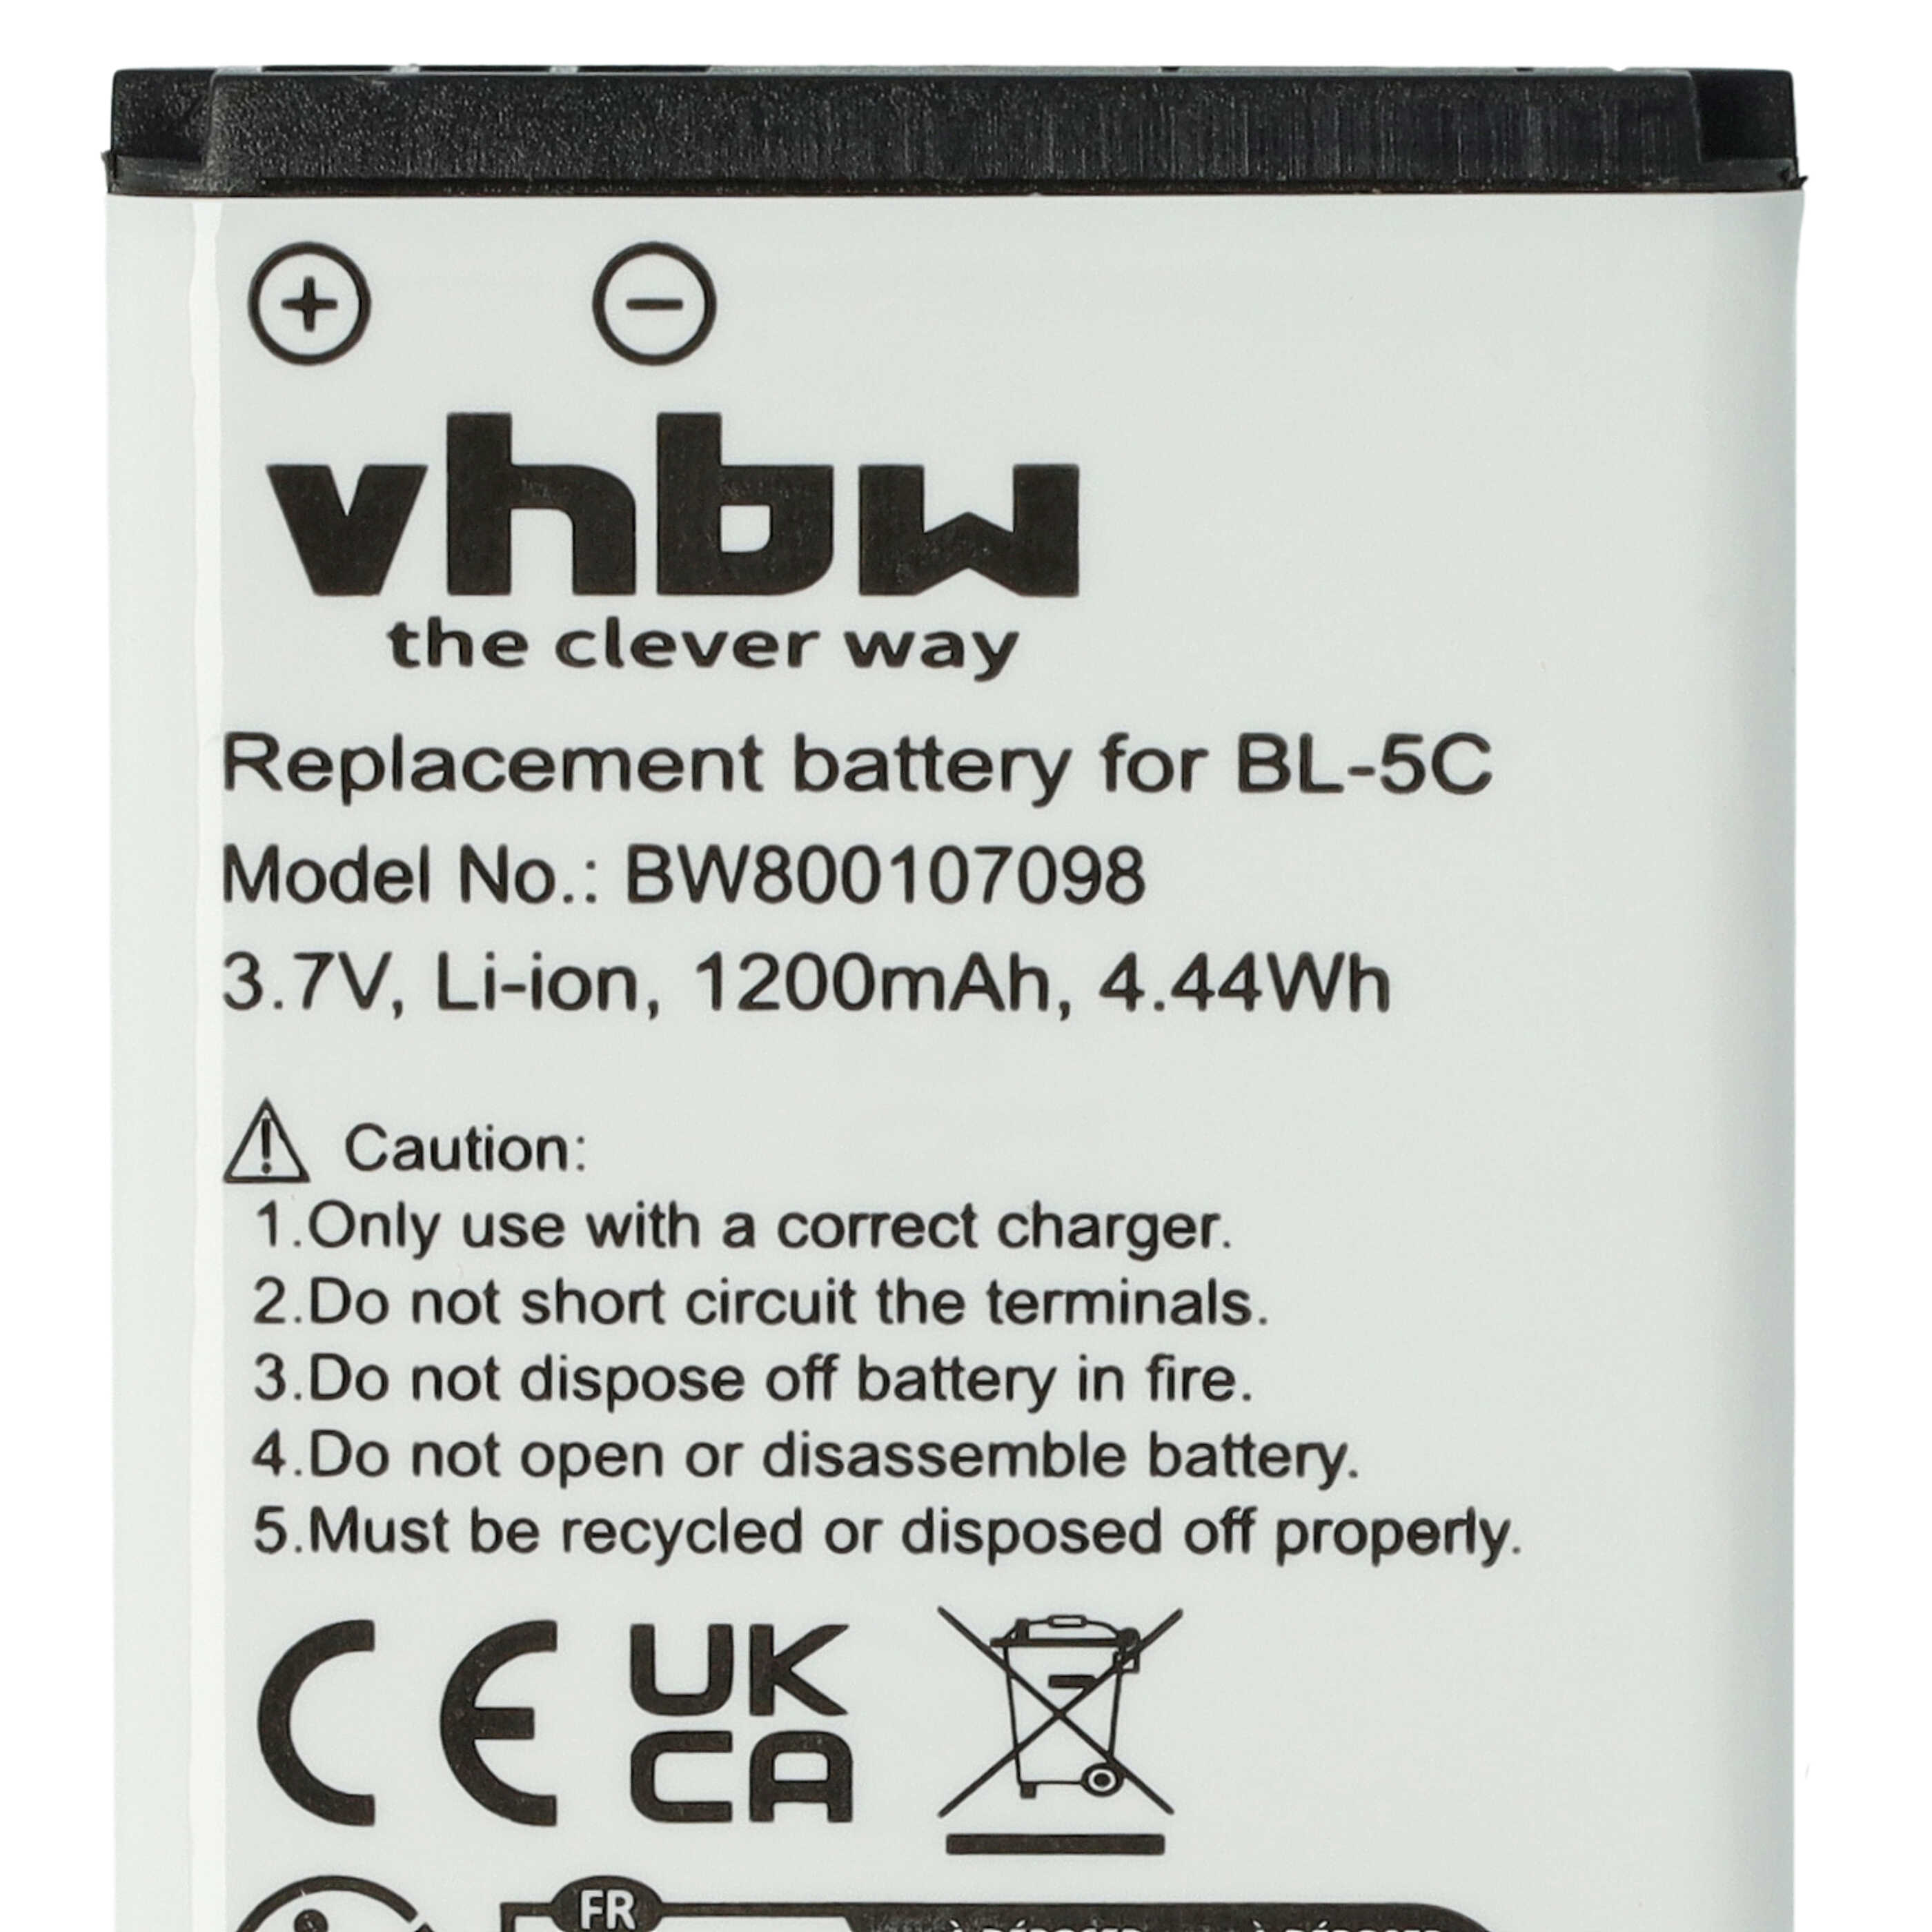 Mobile Phone Battery Replacement for A051 - 1200mAh 3.7V Li-Ion